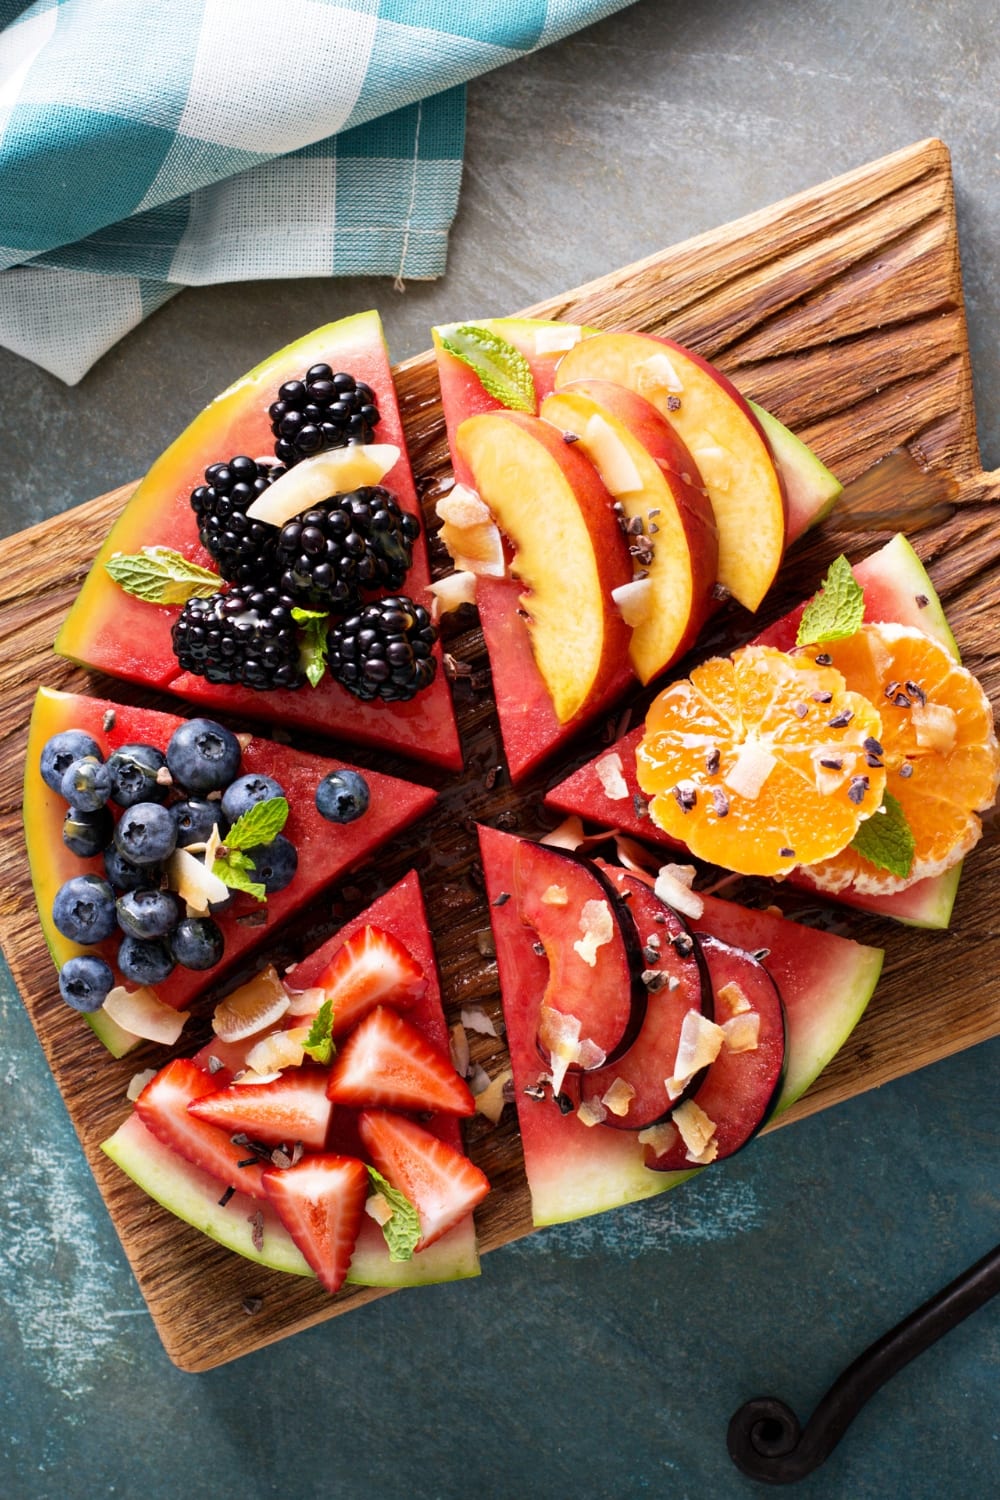 30 Fresh Watermelon Recipes (Easy Ideas) featuring Watermelon Pizza Topped with Blackberries, Plums, Oranges, Peaches, Blueberries, Strawberries, Toasted Coconut, and Mint on a Wooden Cutting Board